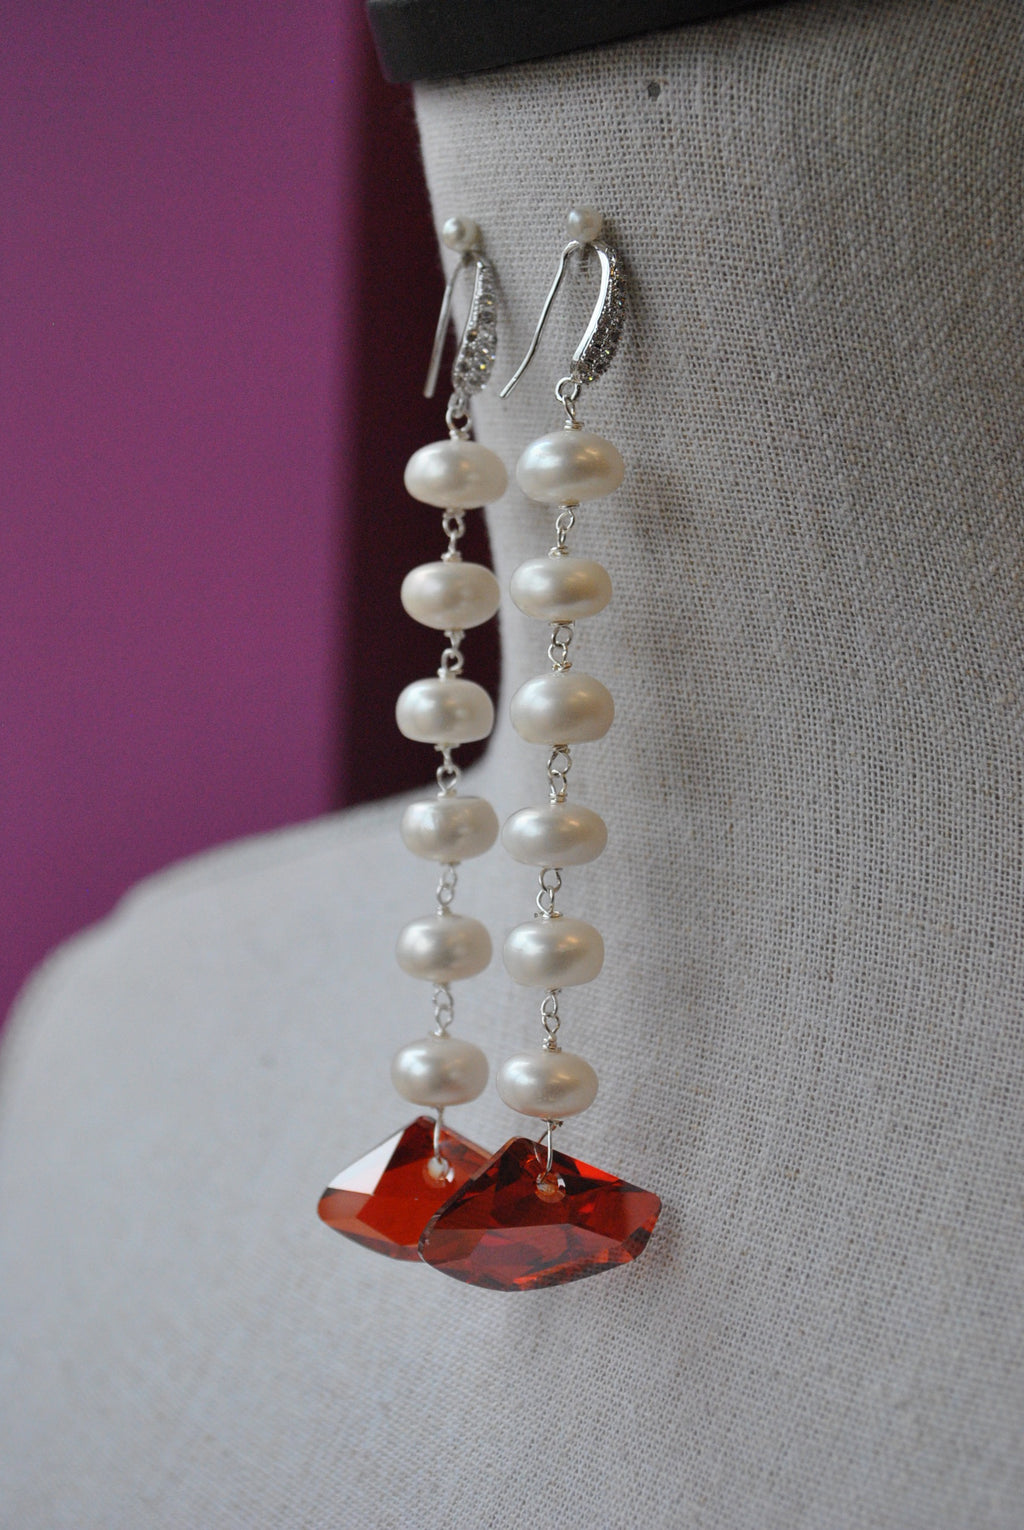 RED MAGMA SWAROVSKI CRYSTALS AND WHITE FRESHWWATER PEARLS LONG EARRINGS